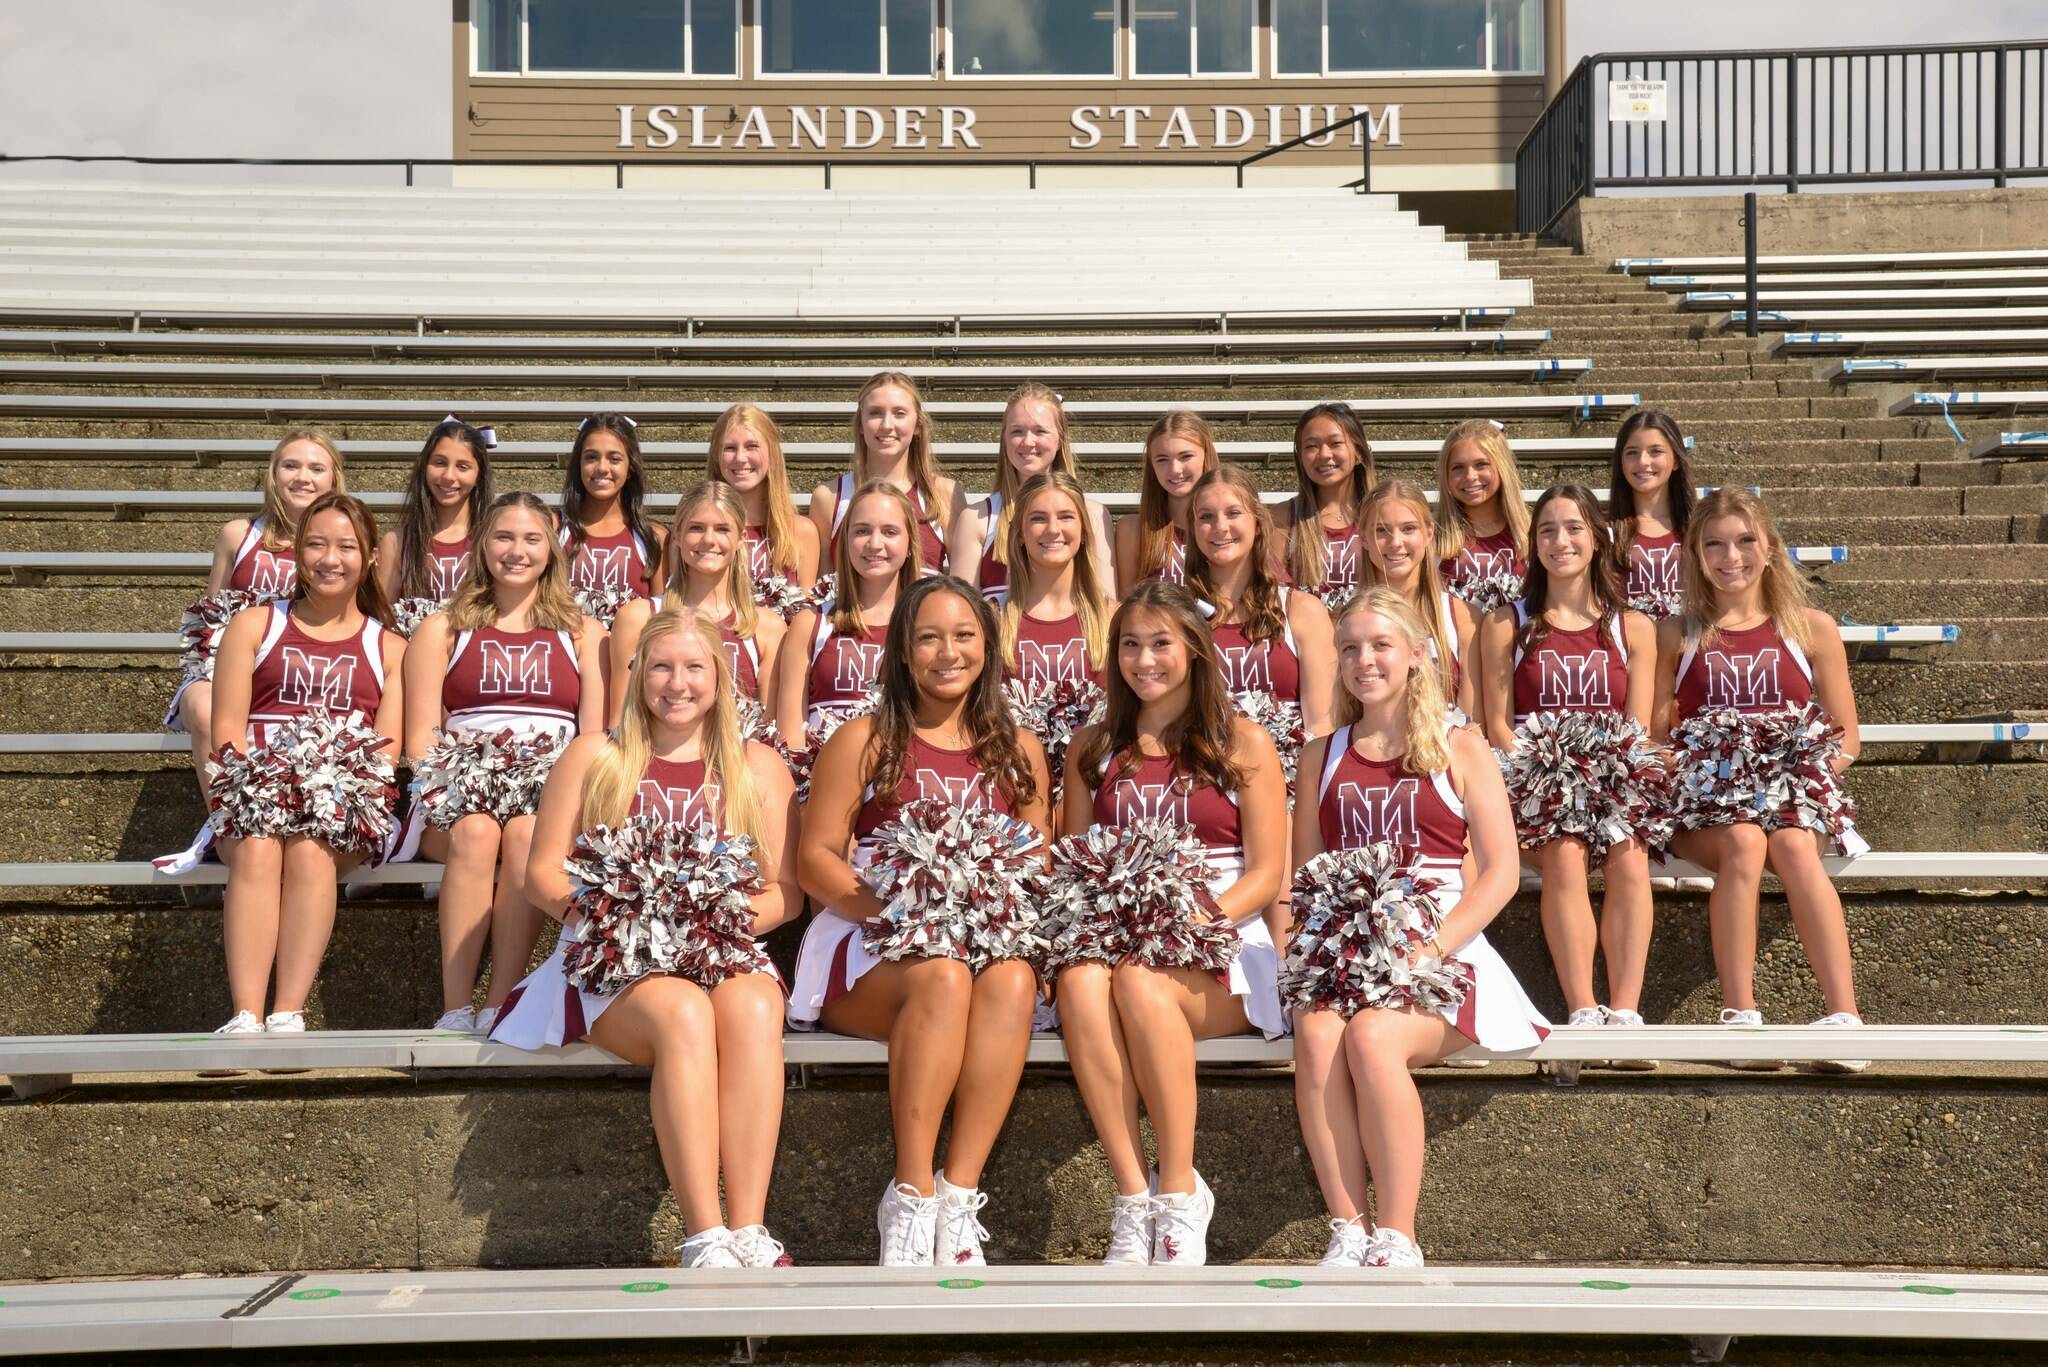 The Mercer Island High School cheer team was named the 3A academic state champions with a combined 3.8 grade-point average. They are: front row (left to right): captains Stella Prophater, Ella Simpson, Carys Ciobanu and Sarah Kann. Middle row (left to right): Sophia Rosales, Kayla Friedman, Nina Hobson, Maeve Sullivan, Hannah Hobson, Julia Brondello, Lindsey Whelan, Olivia Tomaselli and Marissa Magnussen. Back row (left to right): Eve Canady, Morgan Weiss, Jaya Manhas, Maya Lawrence, Alex Winn, Linnea Garner, Maddie Thompson, Camelee Yee, Claire Jacobs and Stella Szafir. Not pictured: Gabrielle Hood. Courtesy photo